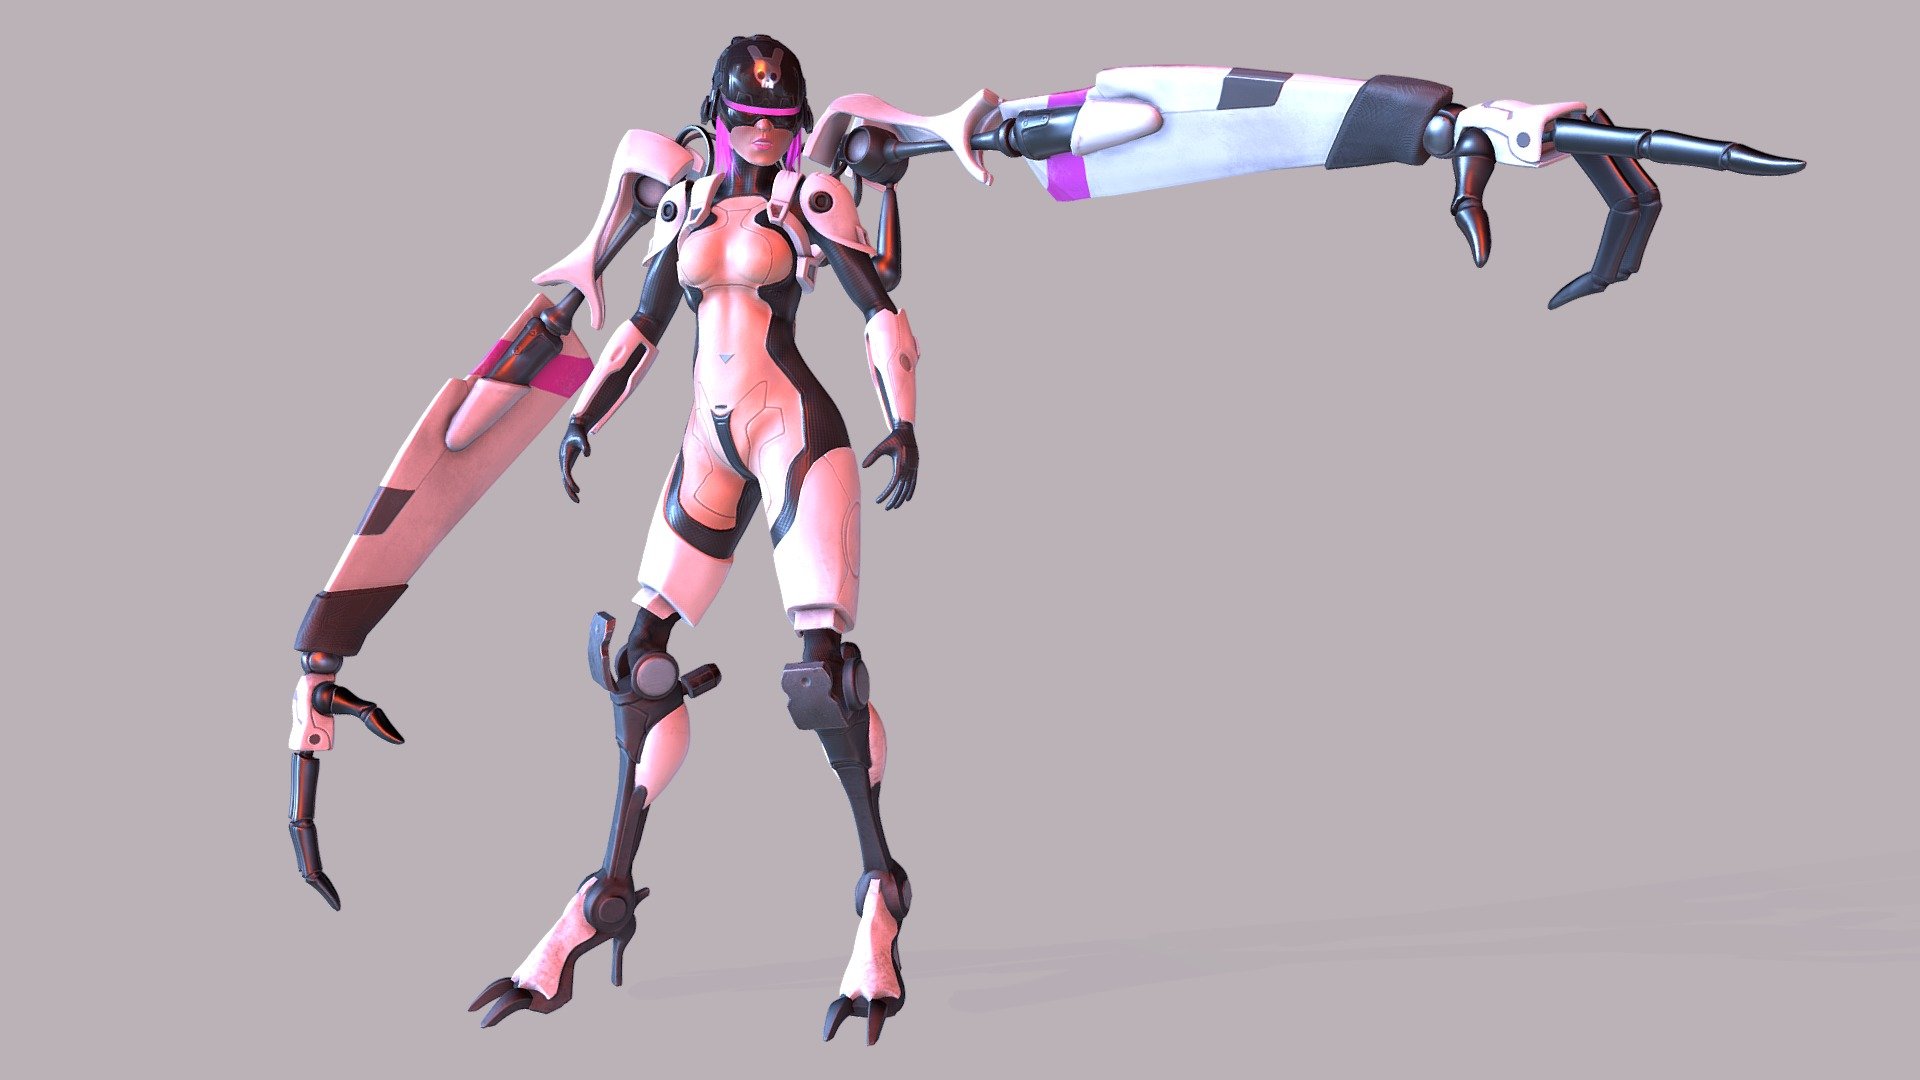 Alternate version of the Cyborg character, posed in ZBrush 3d model